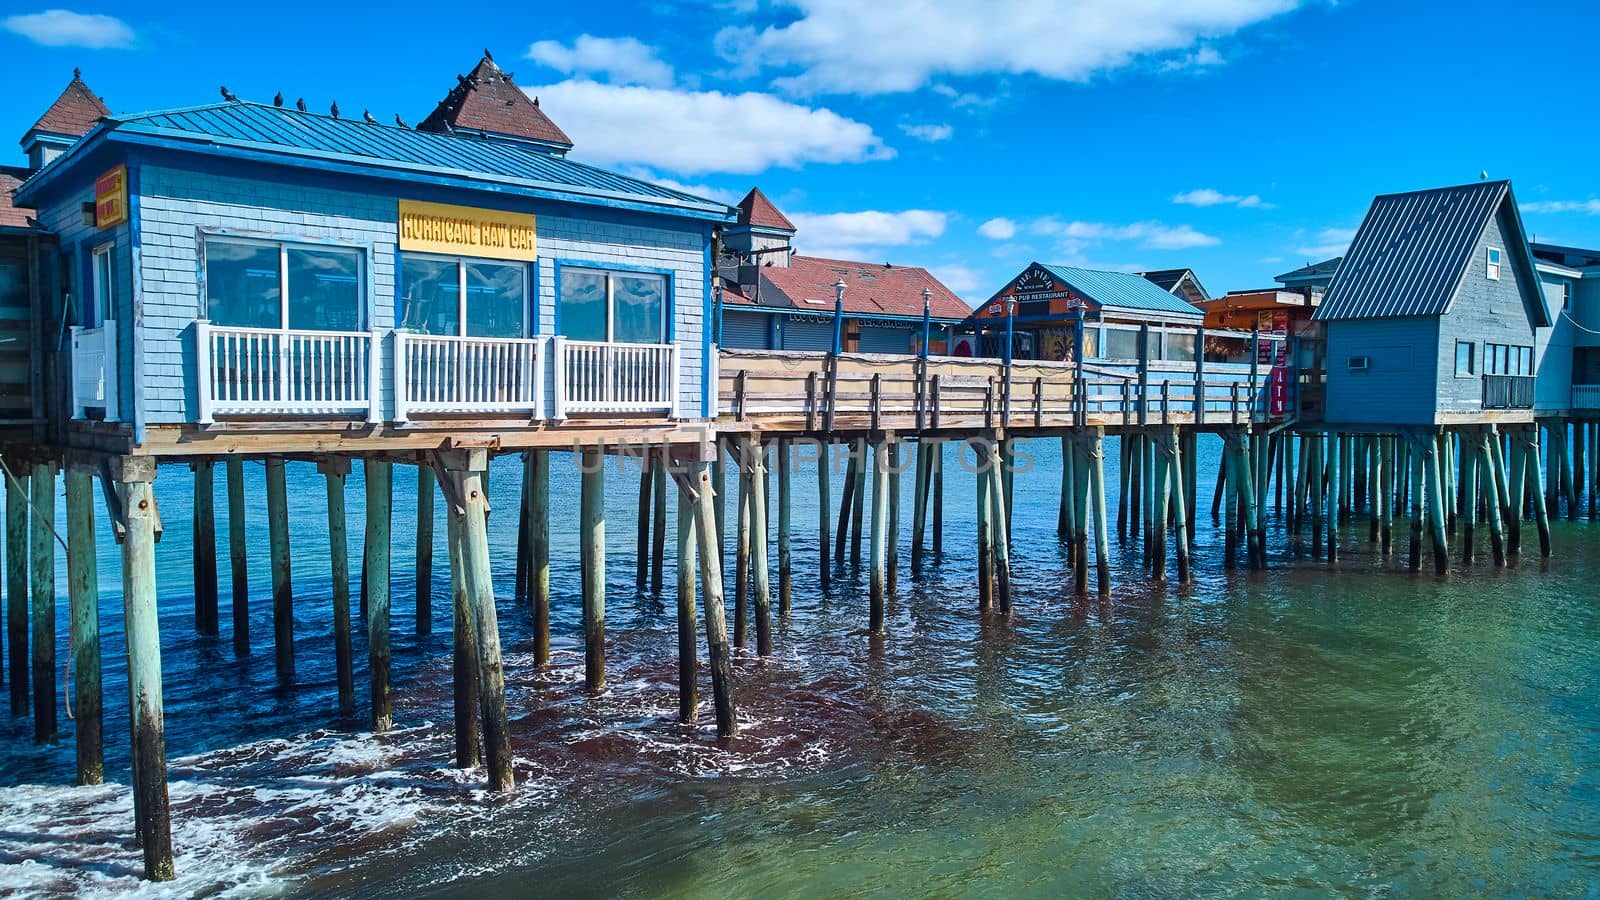 Image of Old wood pier covered in buildings on Maine coast of ocean